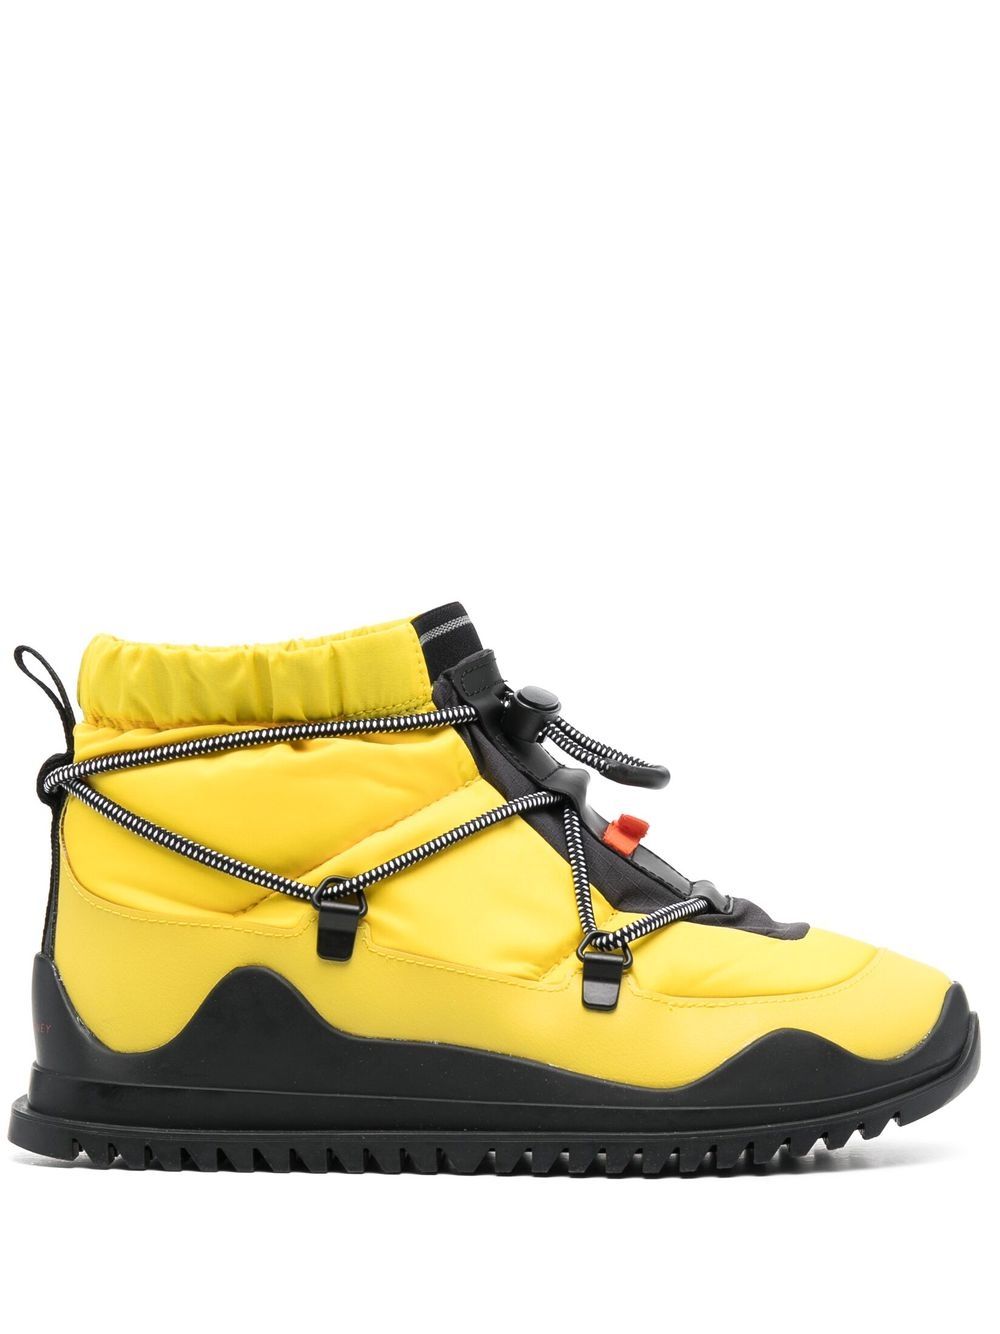 adidas by Stella McCartney x Cold.Rdy padded ankle boots - Yellow